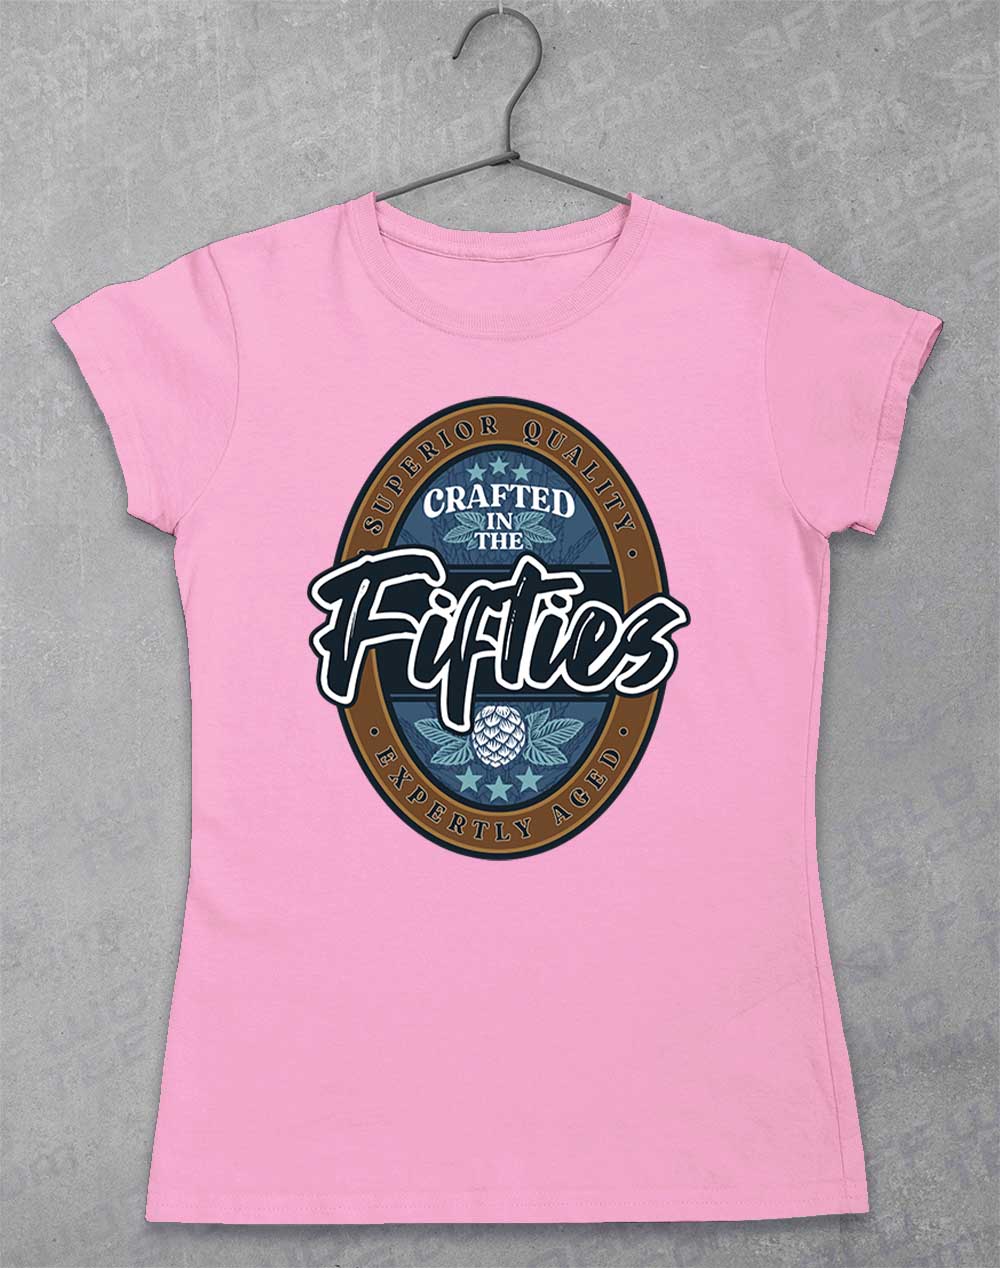 Crafted in the Fifties Women's T-Shirt